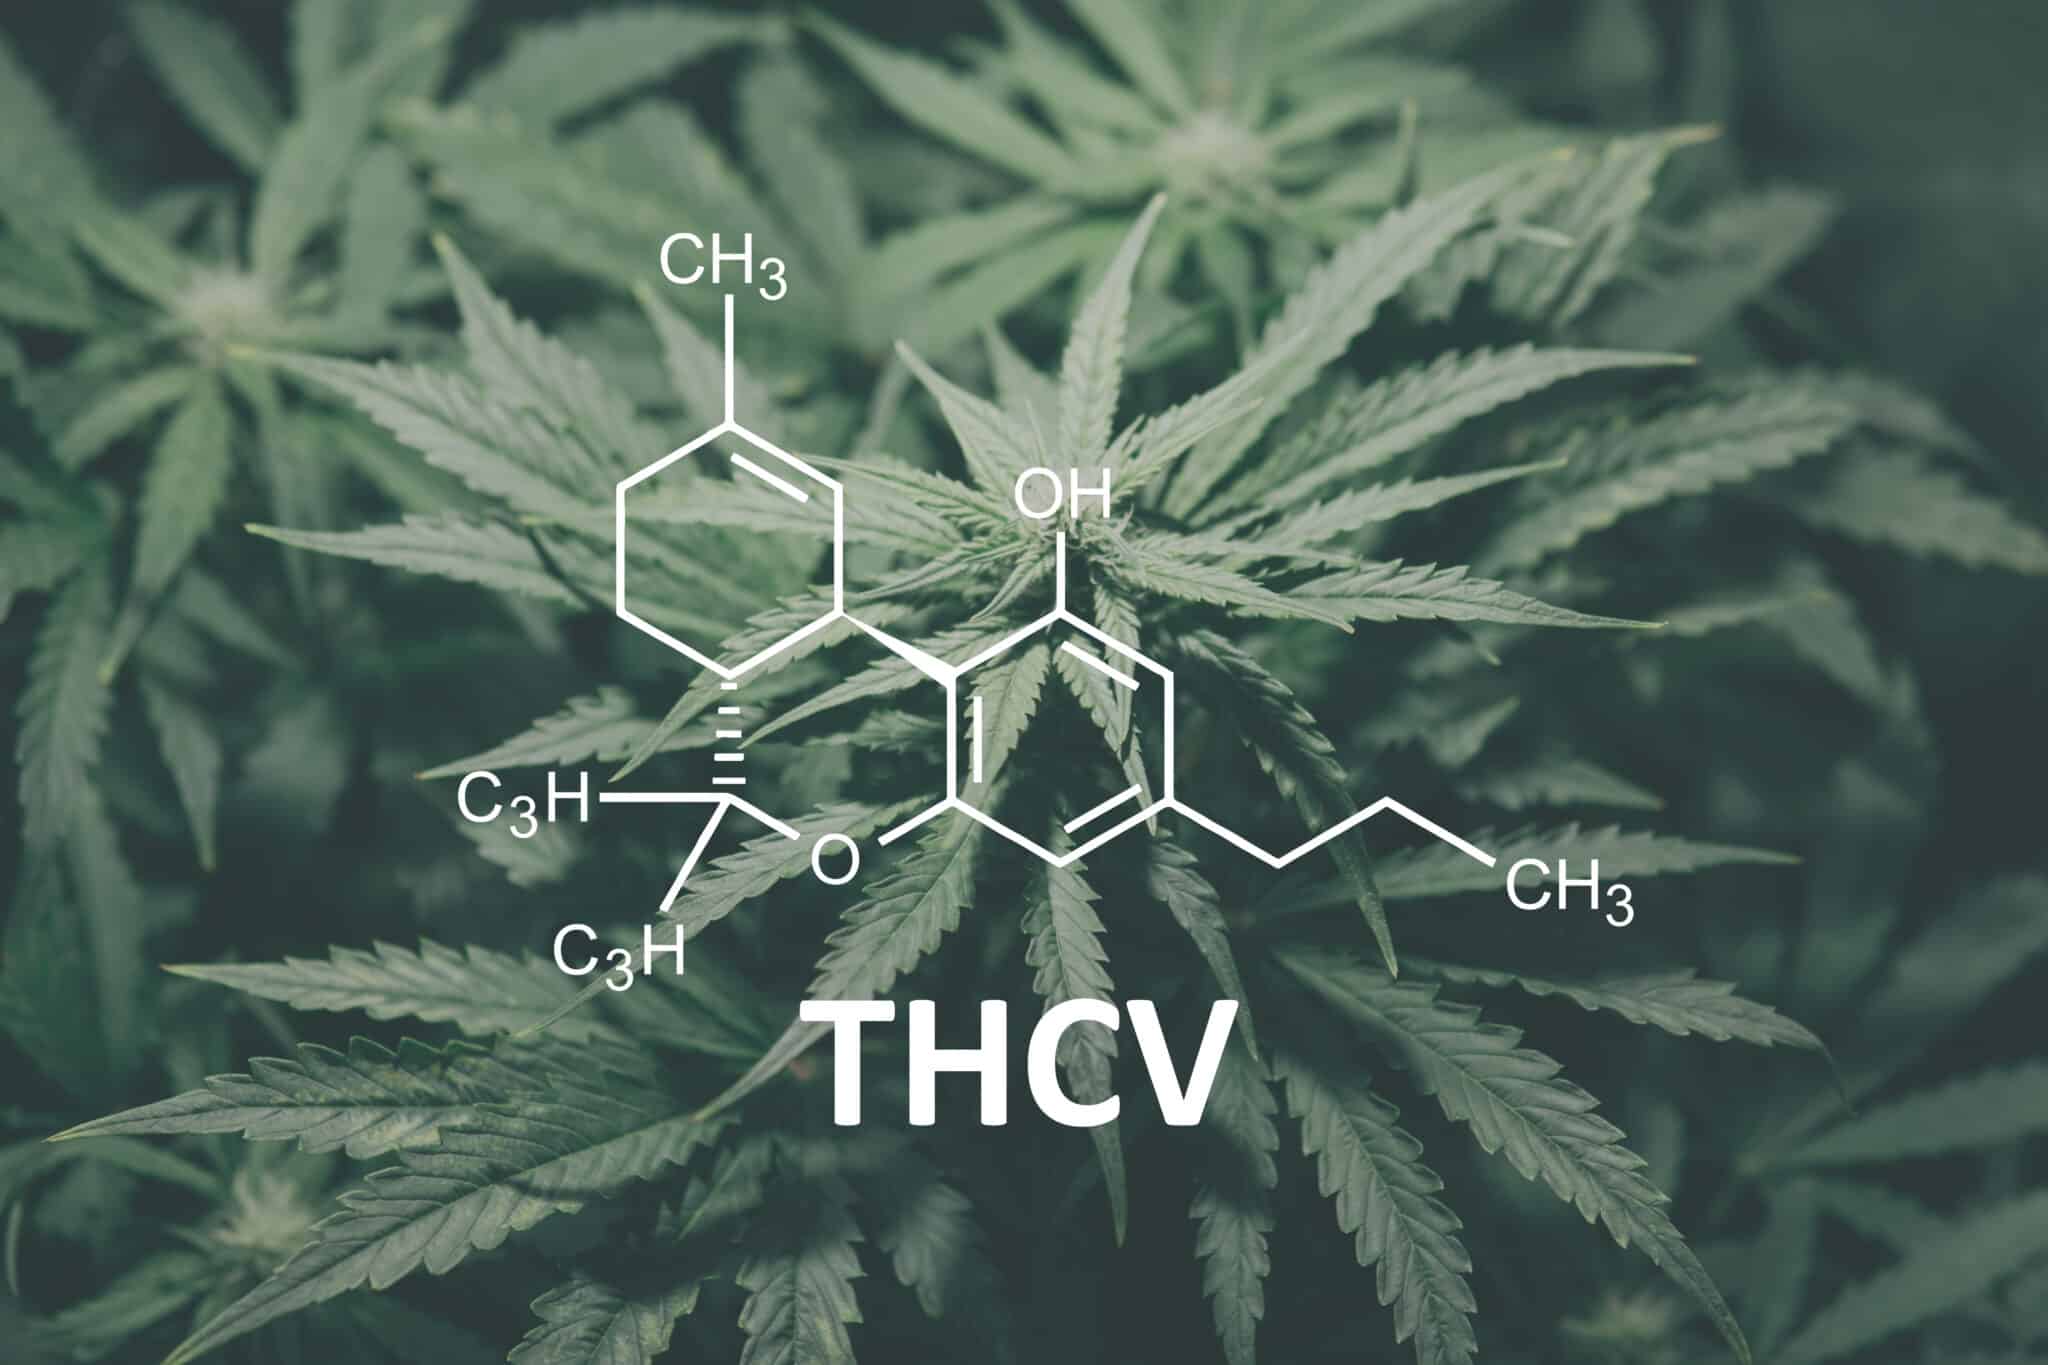 THCV vs. THC: What’s the Difference?